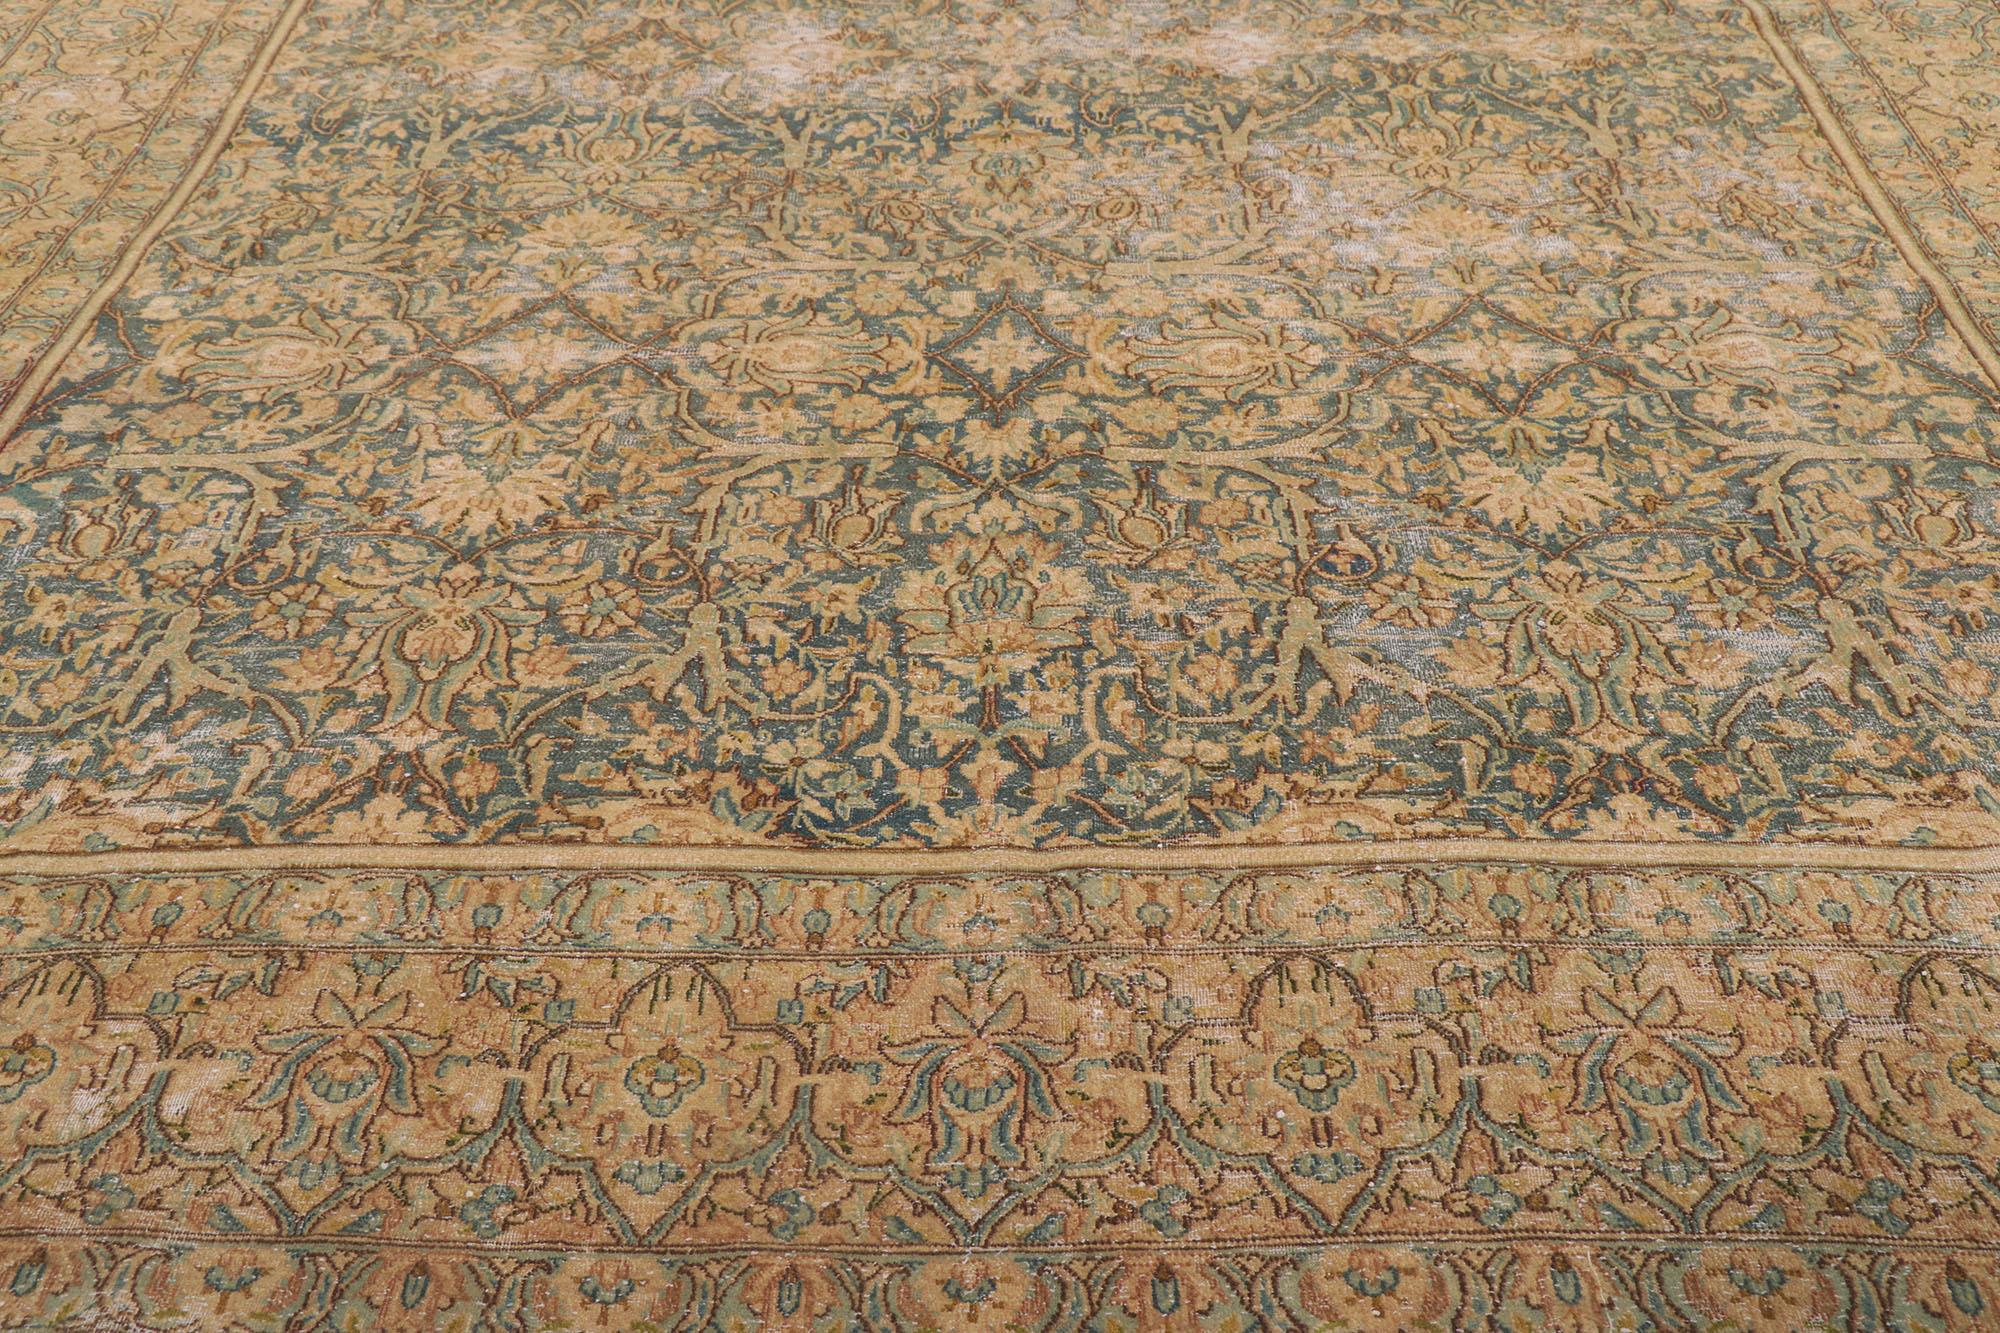 Hand-Knotted Antique-Worn Persian Kerman Rug, Rugged Beauty Meets Laid-Back Luxury For Sale